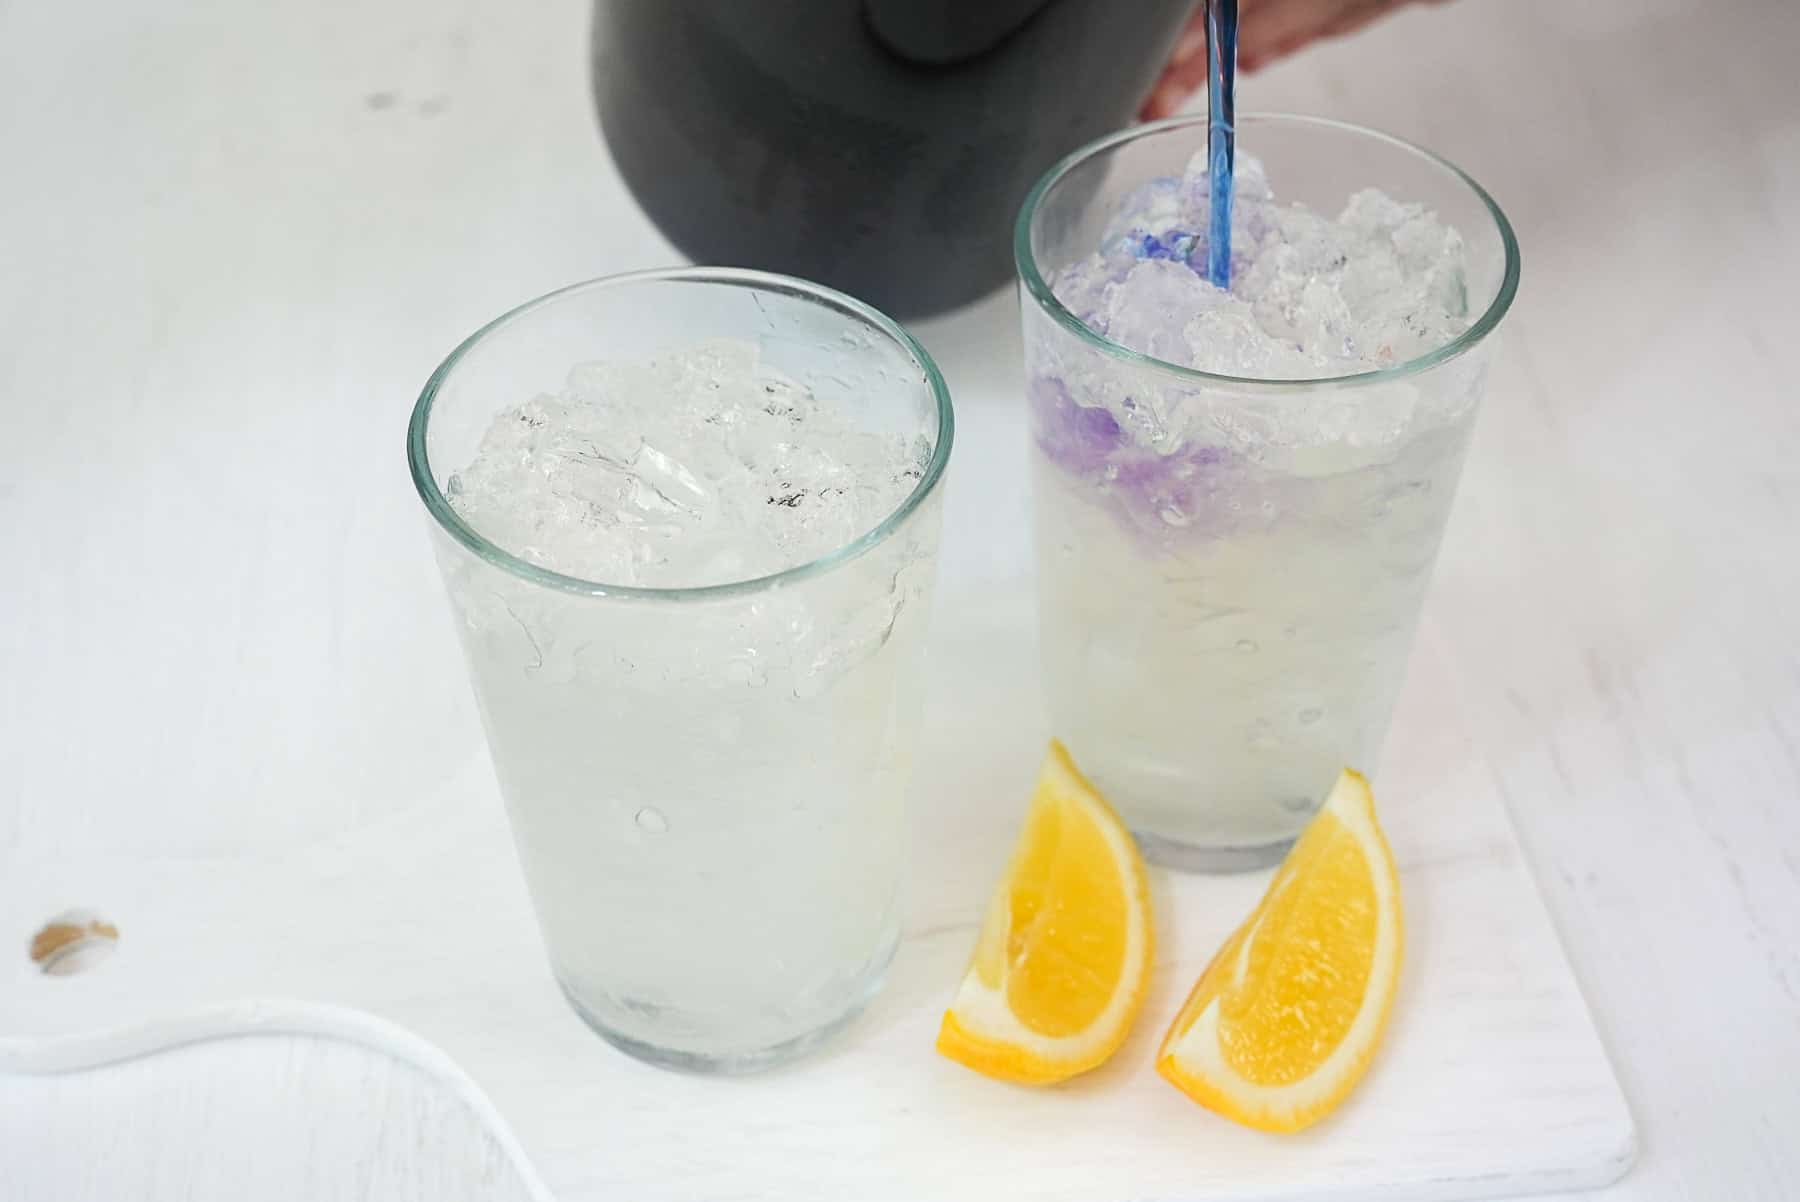 Add butterfly pea water to concentrated lemonade